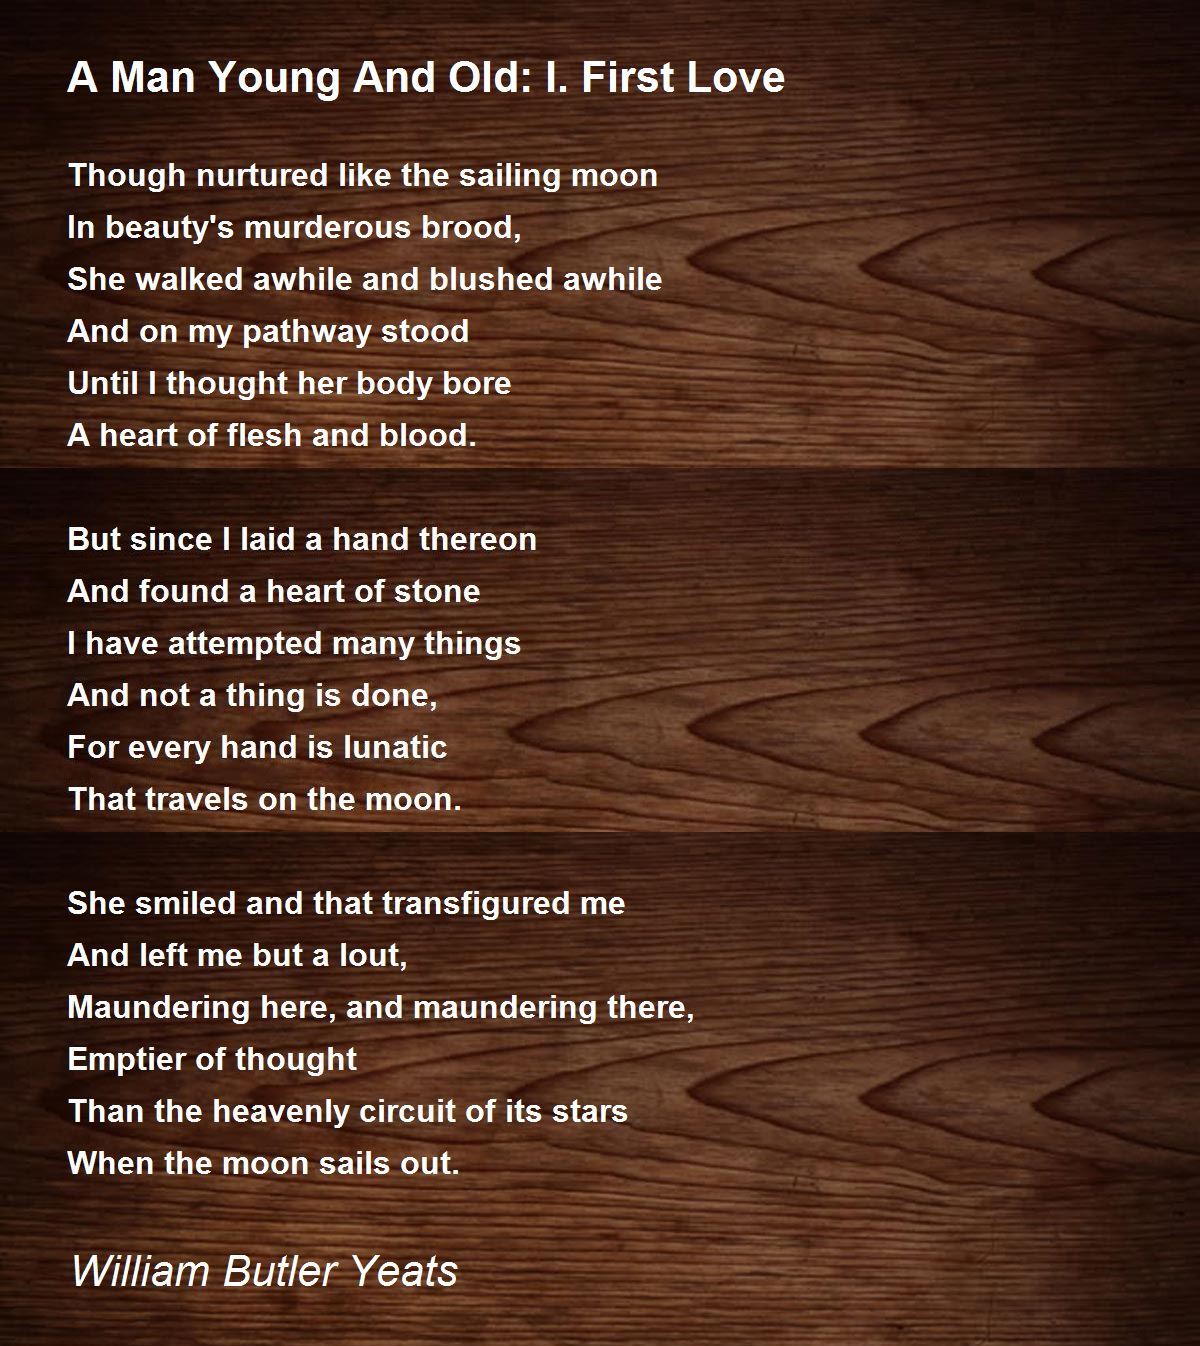 A Man Young And Old: I. First Love Poem by William Butler Yeats - Poem